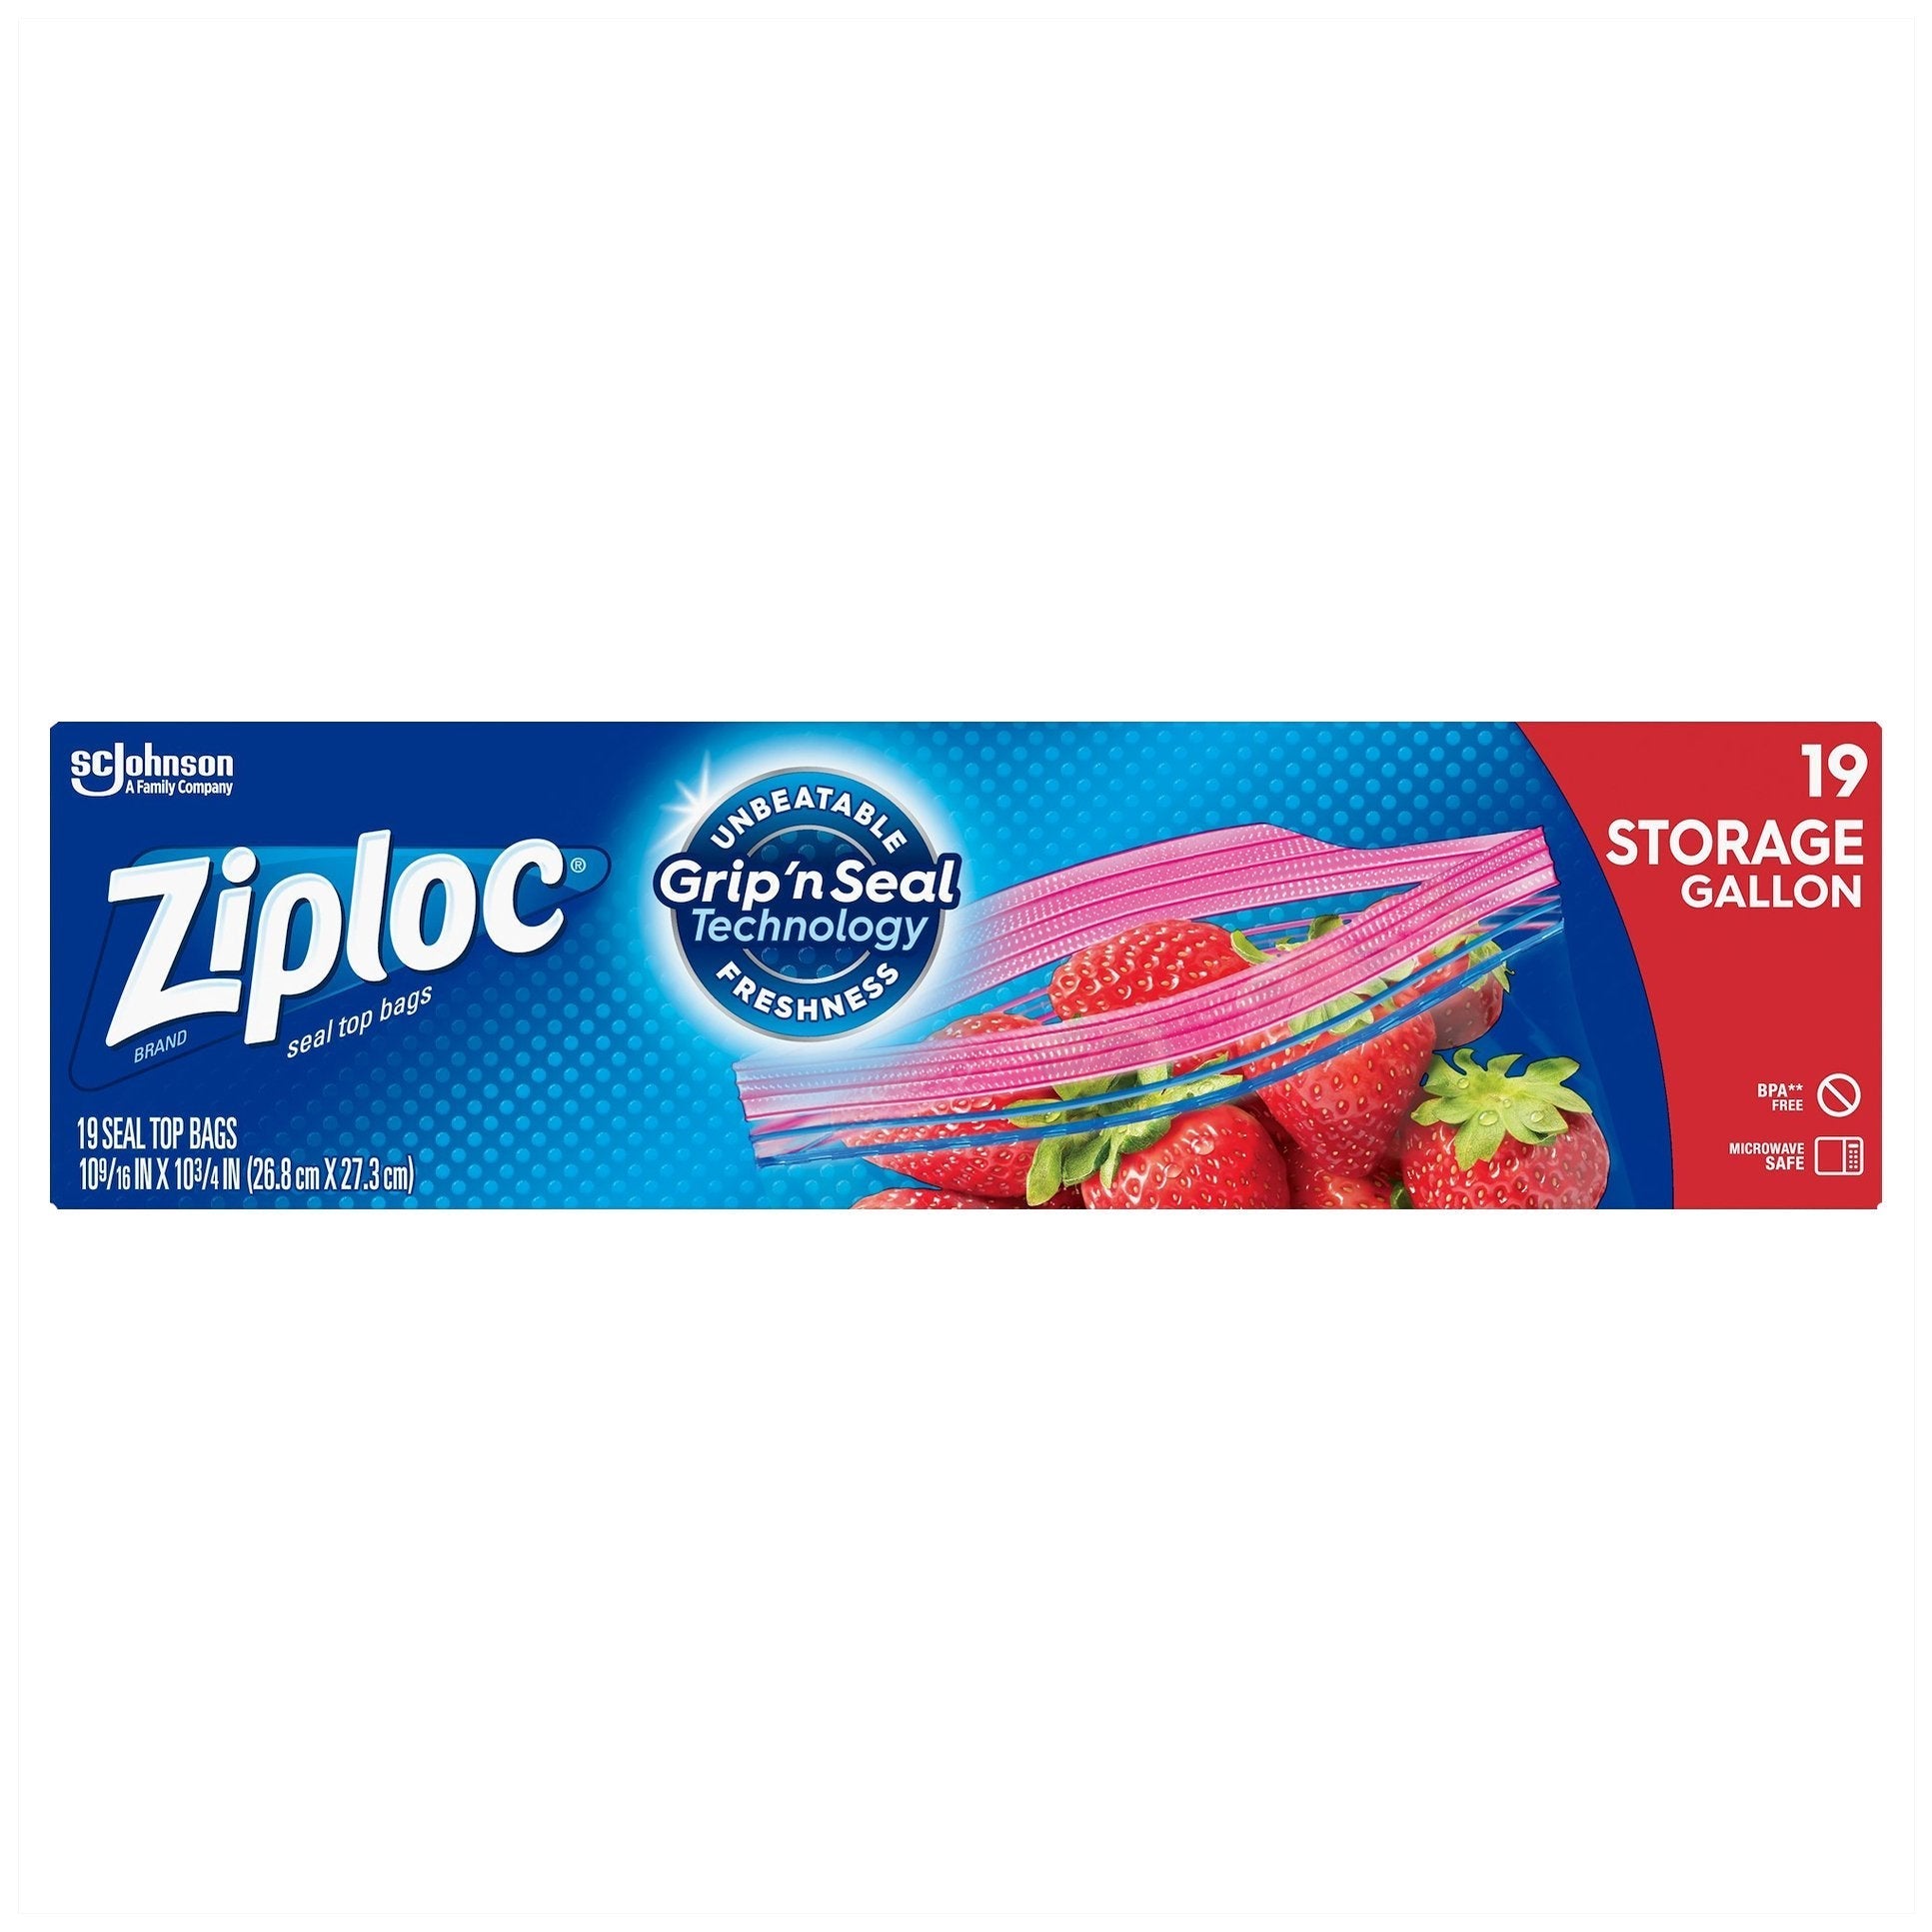 Ziploc Storage Gallon Bags With Grip 'n Seal Technology - 75ct